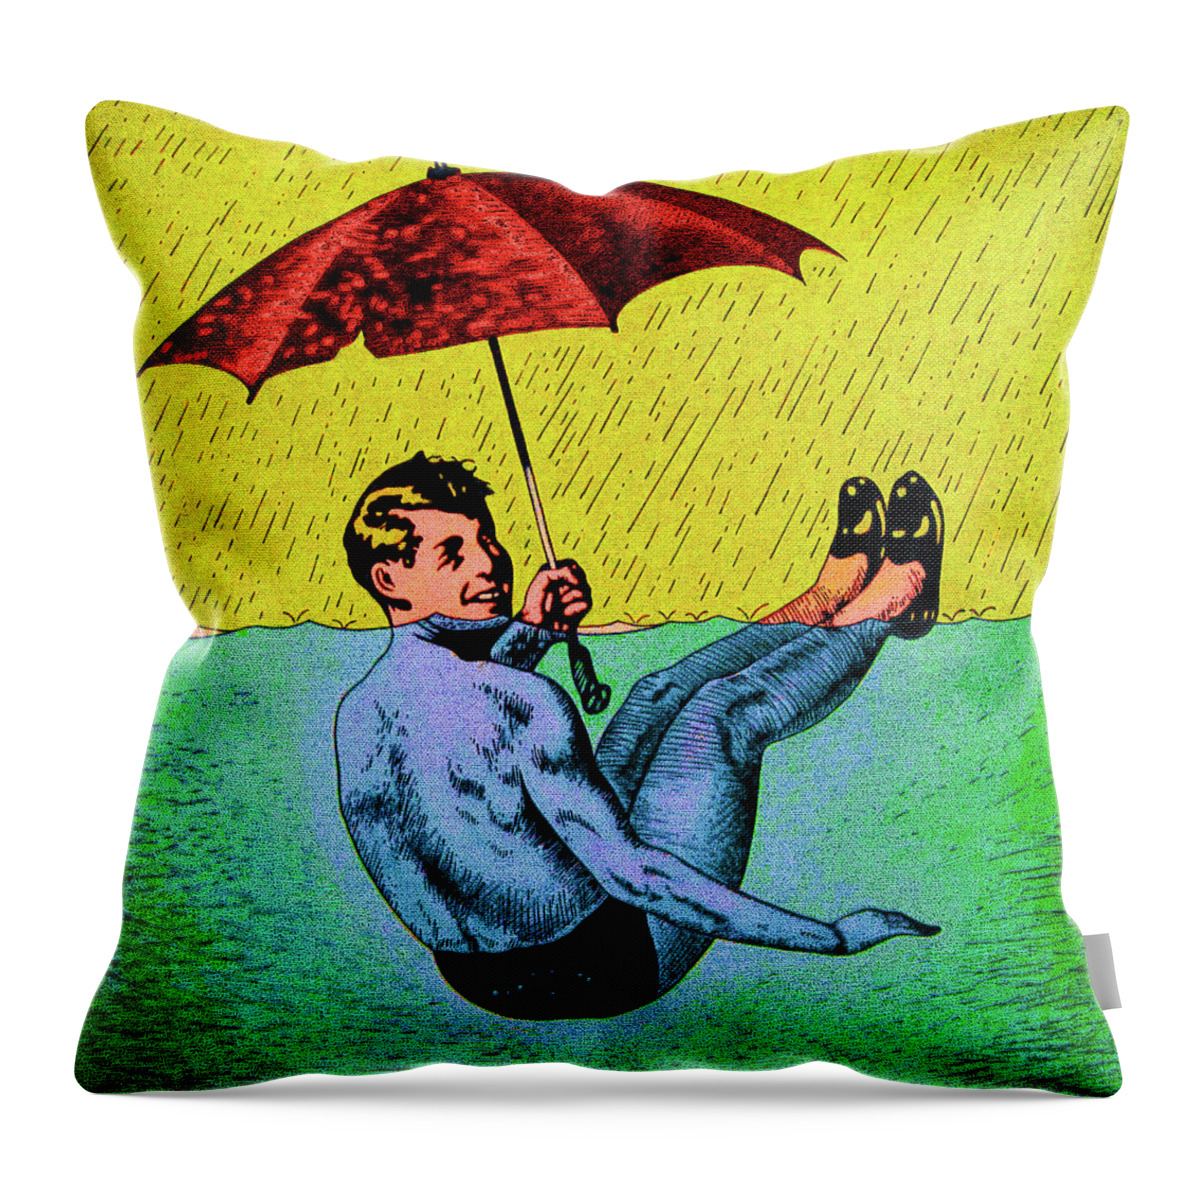  Throw Pillow featuring the painting Umbrella Man 3 by Steve Fields